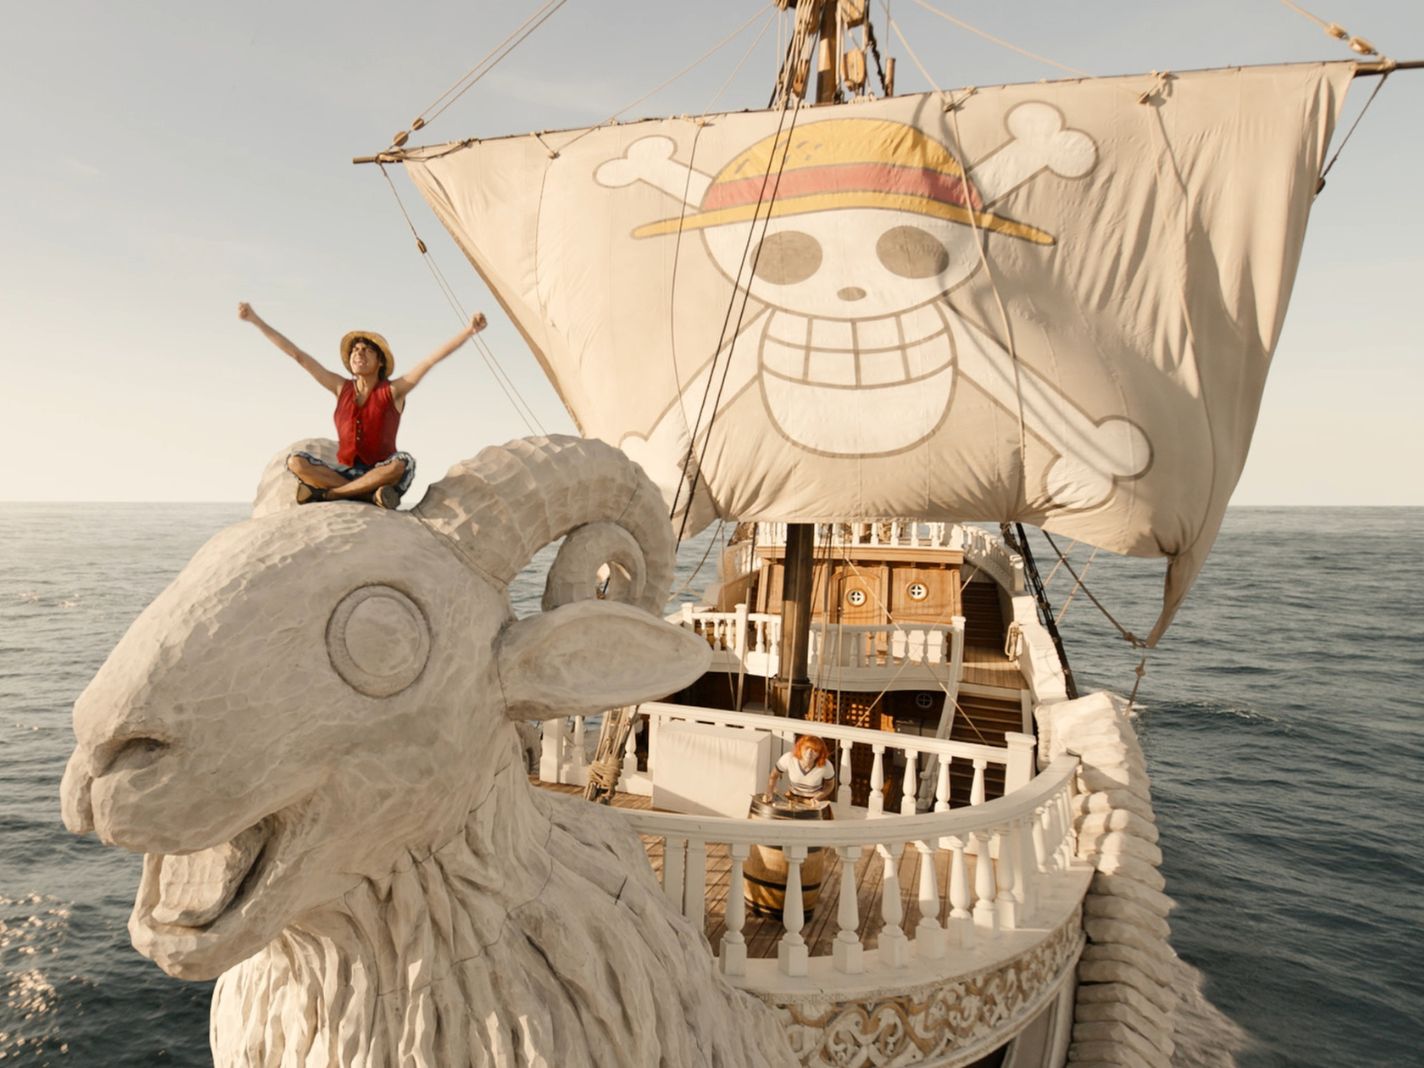 Netflix's live-action One Piece shows off massive ships and sets